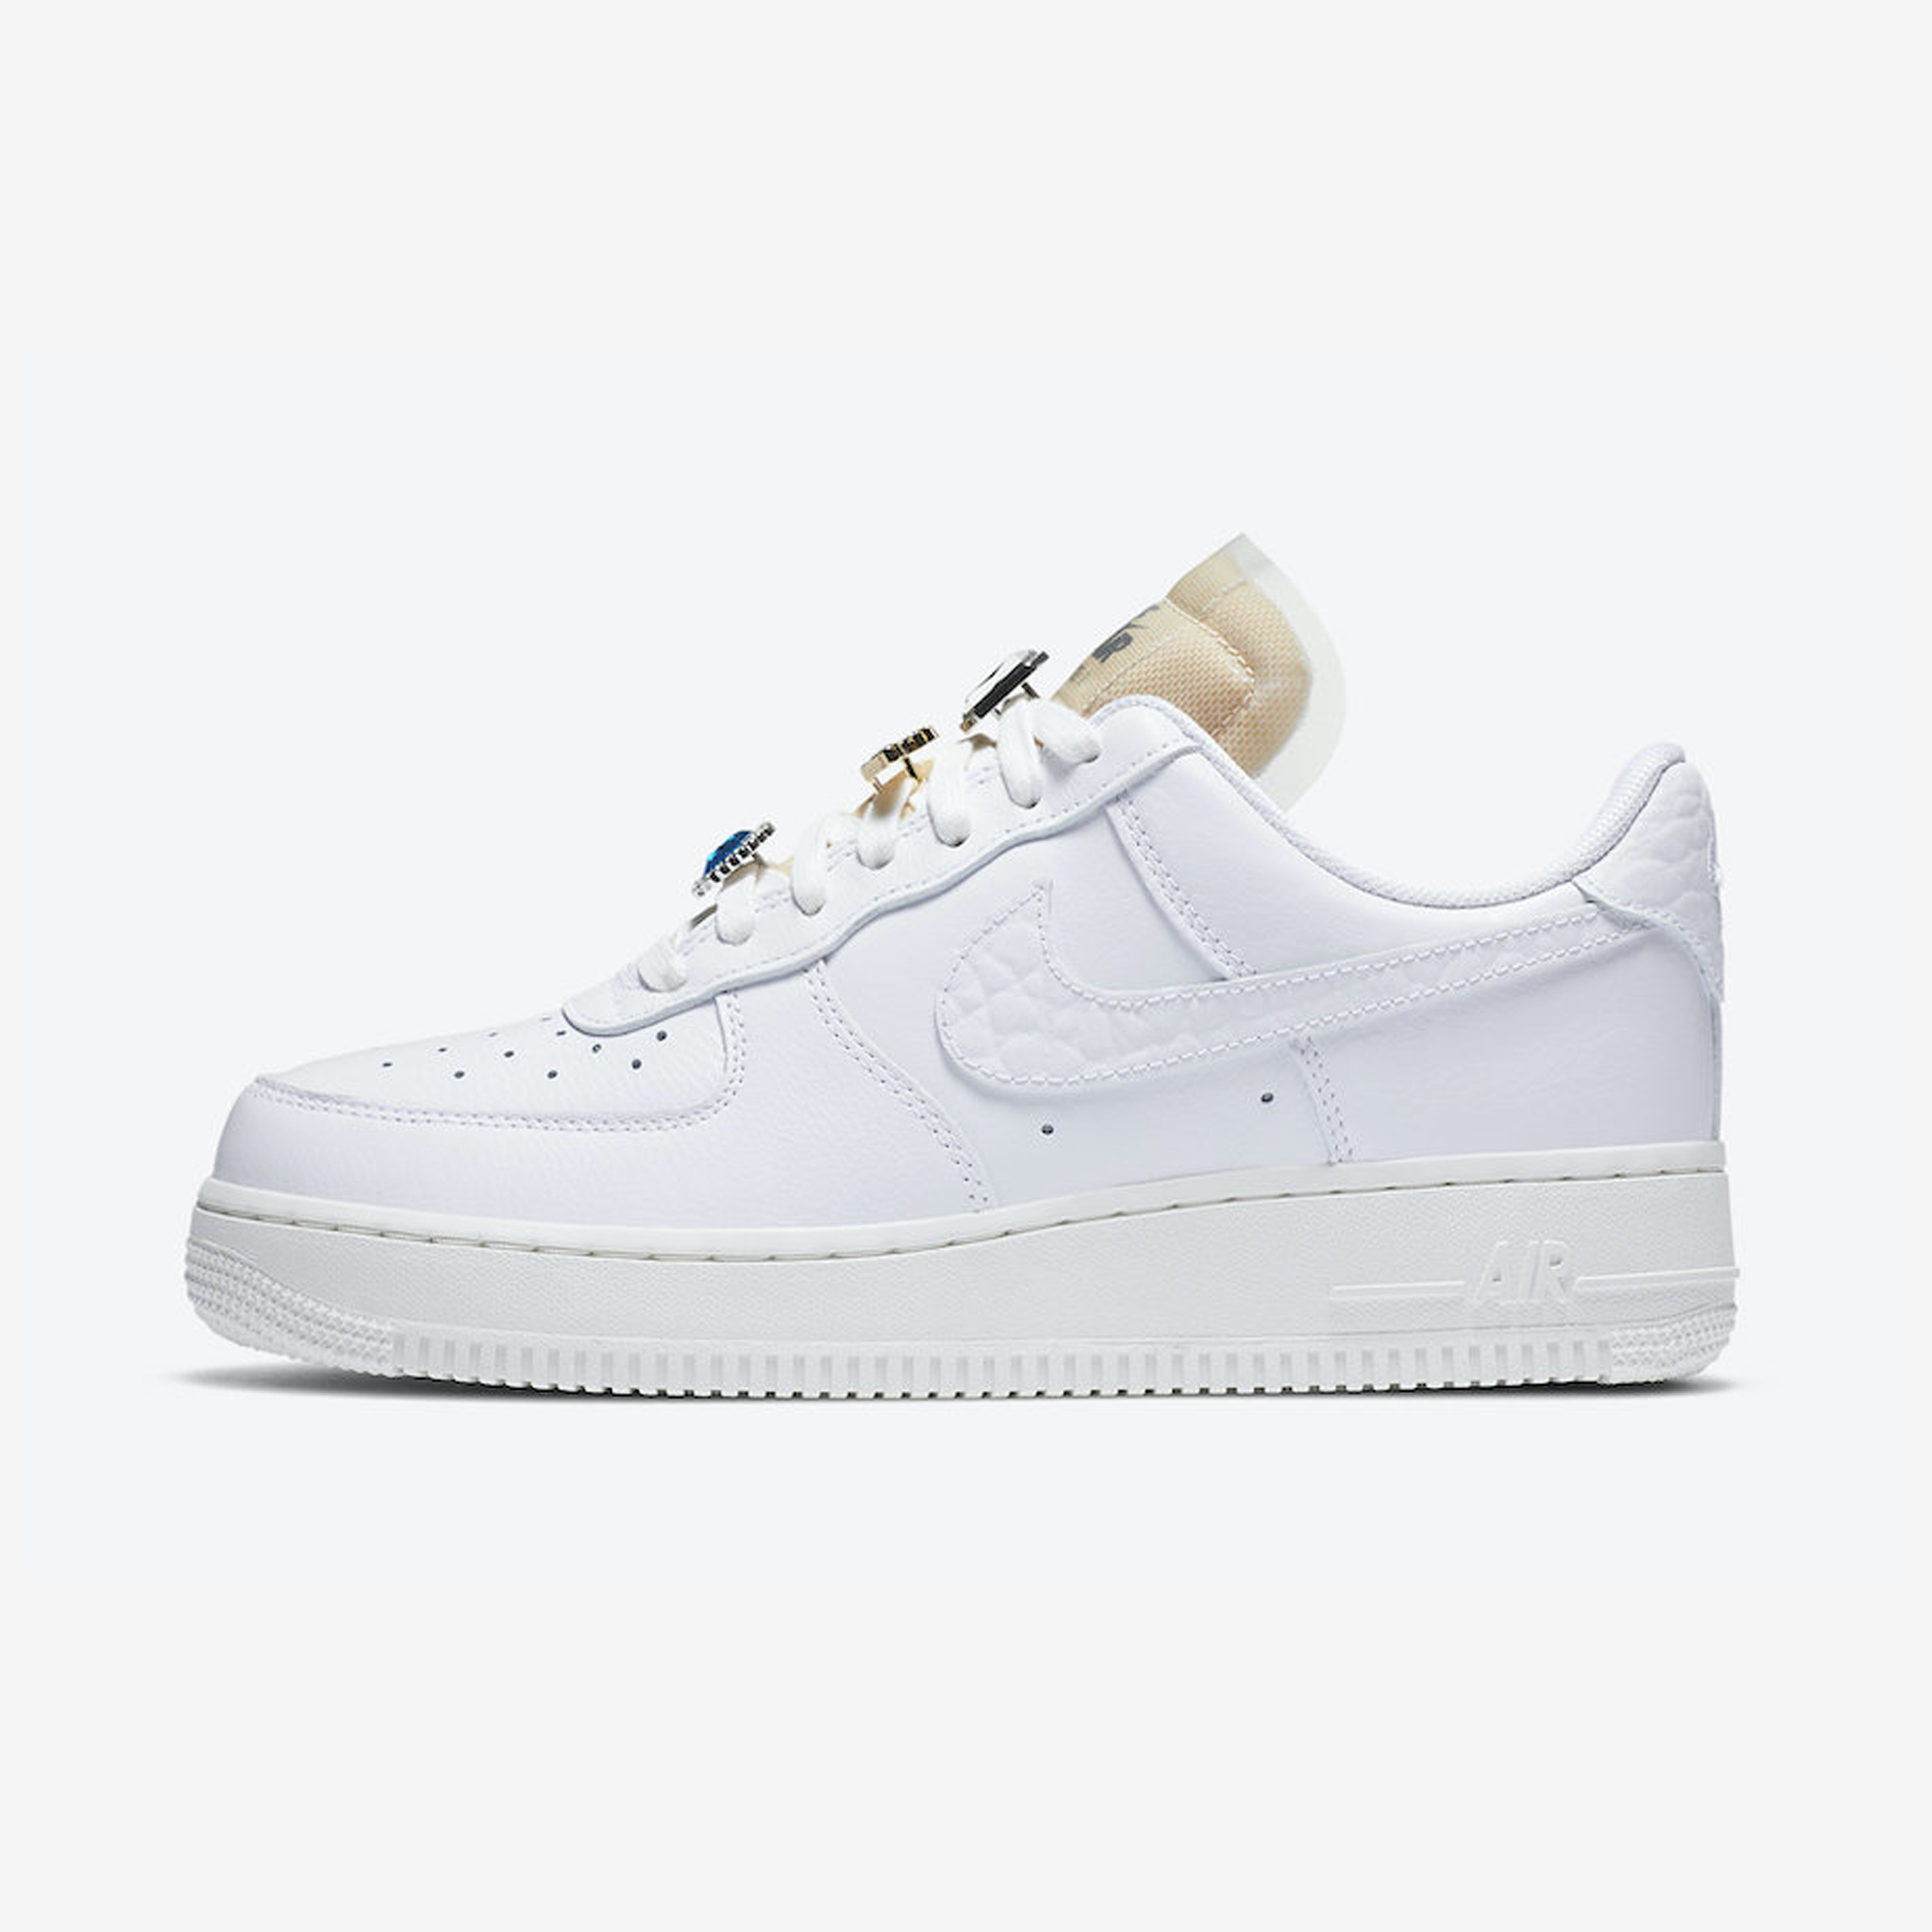 How to Cop Nike Air Force 1 '07 LX CZ8101-100 Raffles & Release Links